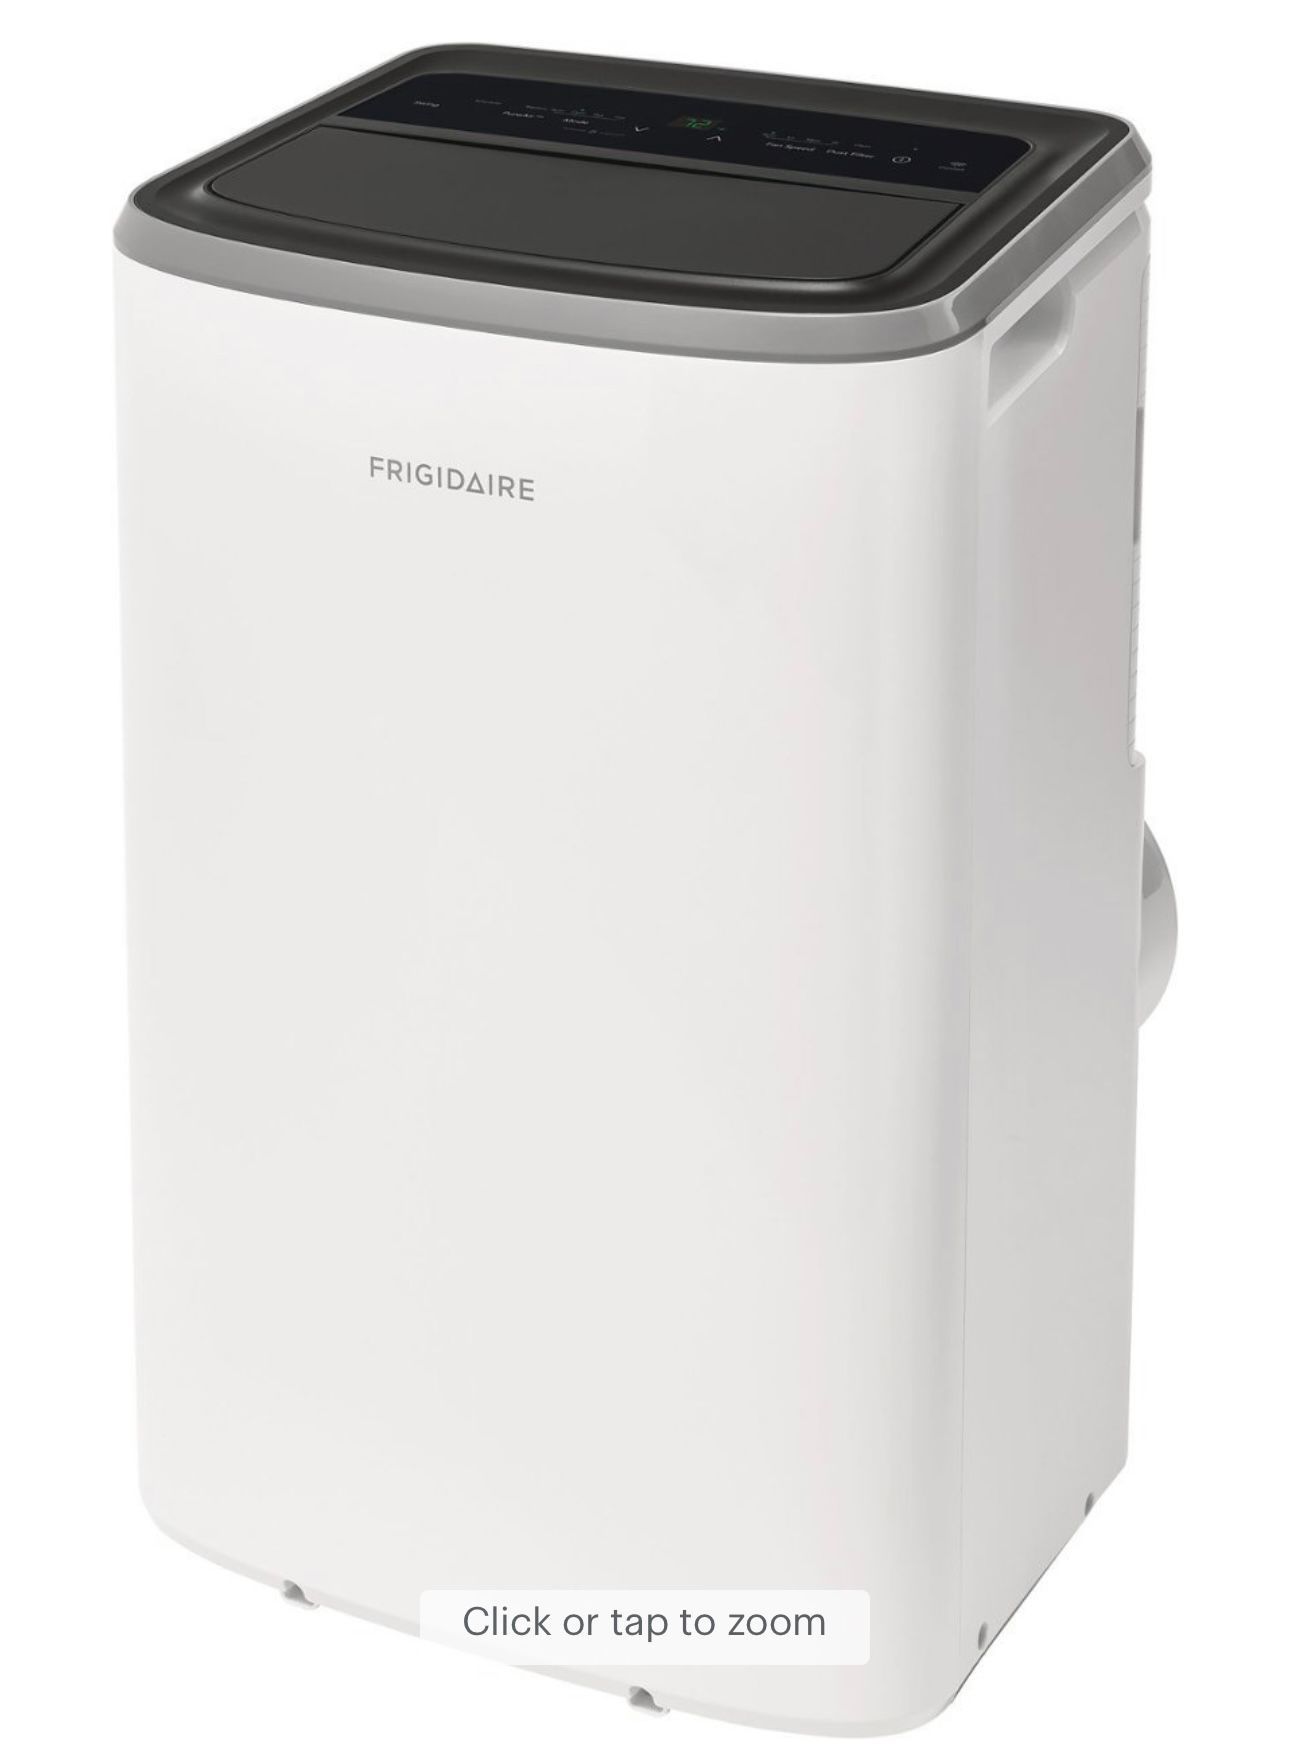 Frigidaire FHPW122AC1 Portable Room Air Conditioner, 12,000 BTU with Multi-Speed Fan, Dehumidifier Mode, Easy-to-Clean Washable Filter, Built-in Air I